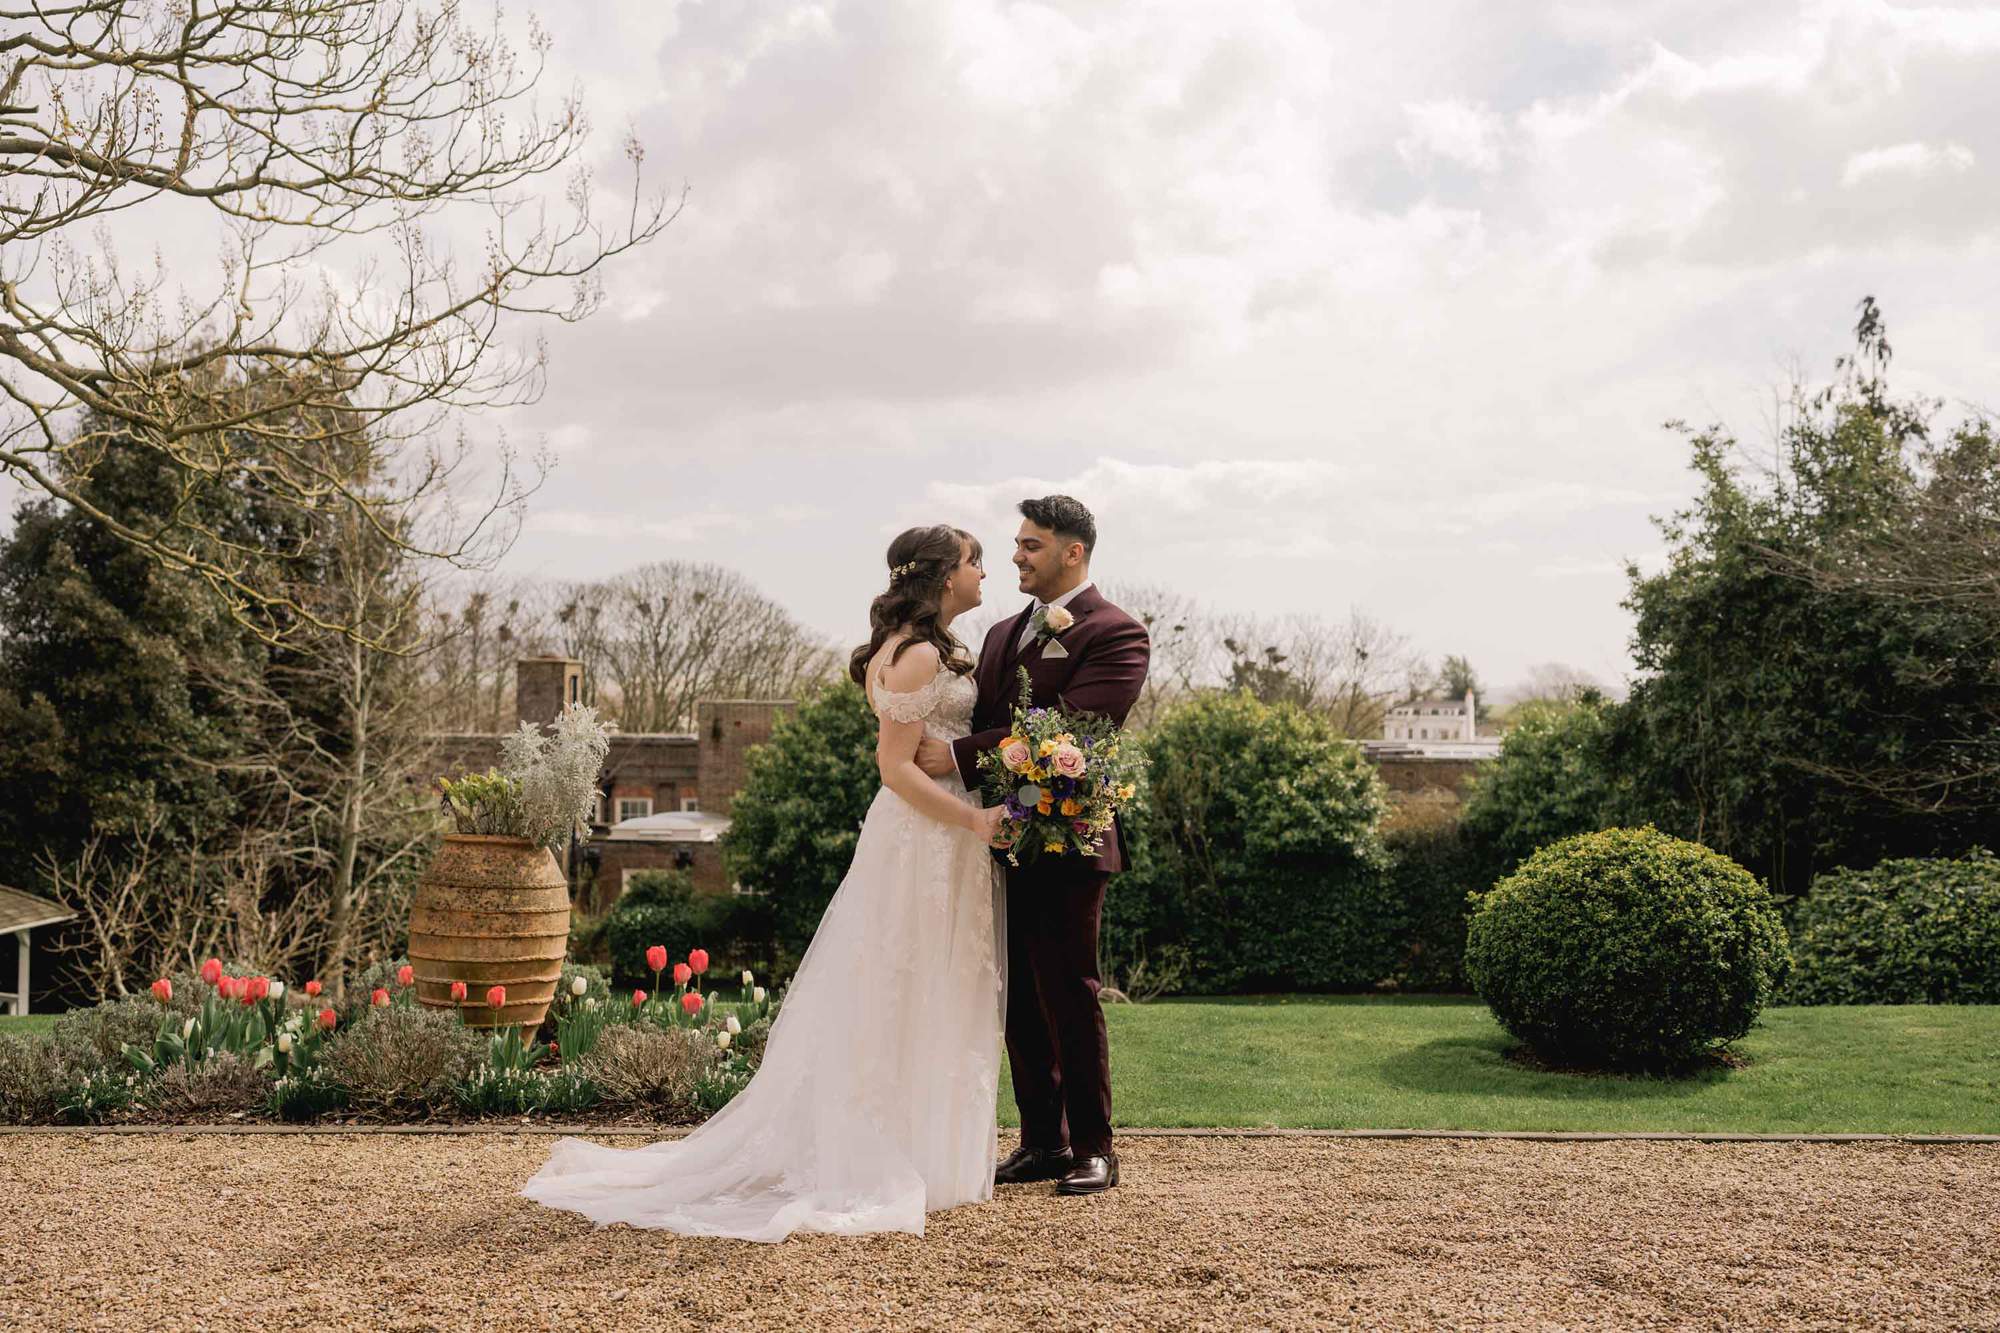 Bride and groom hug closely on their wedding day at Pelham House in East Sussex.